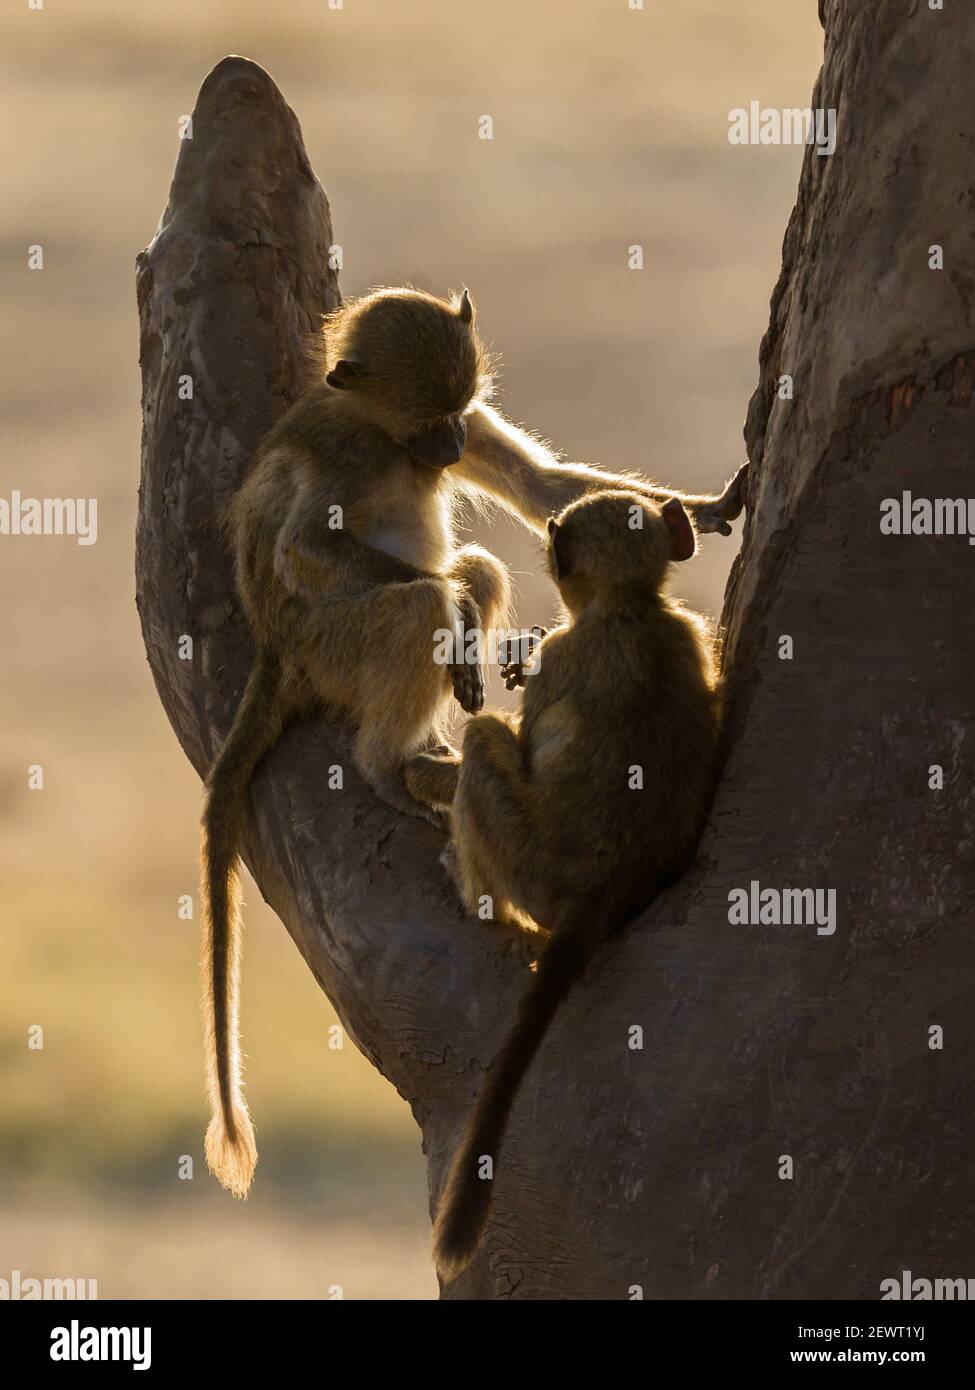 Chacma Baboons a piacere Foto Stock